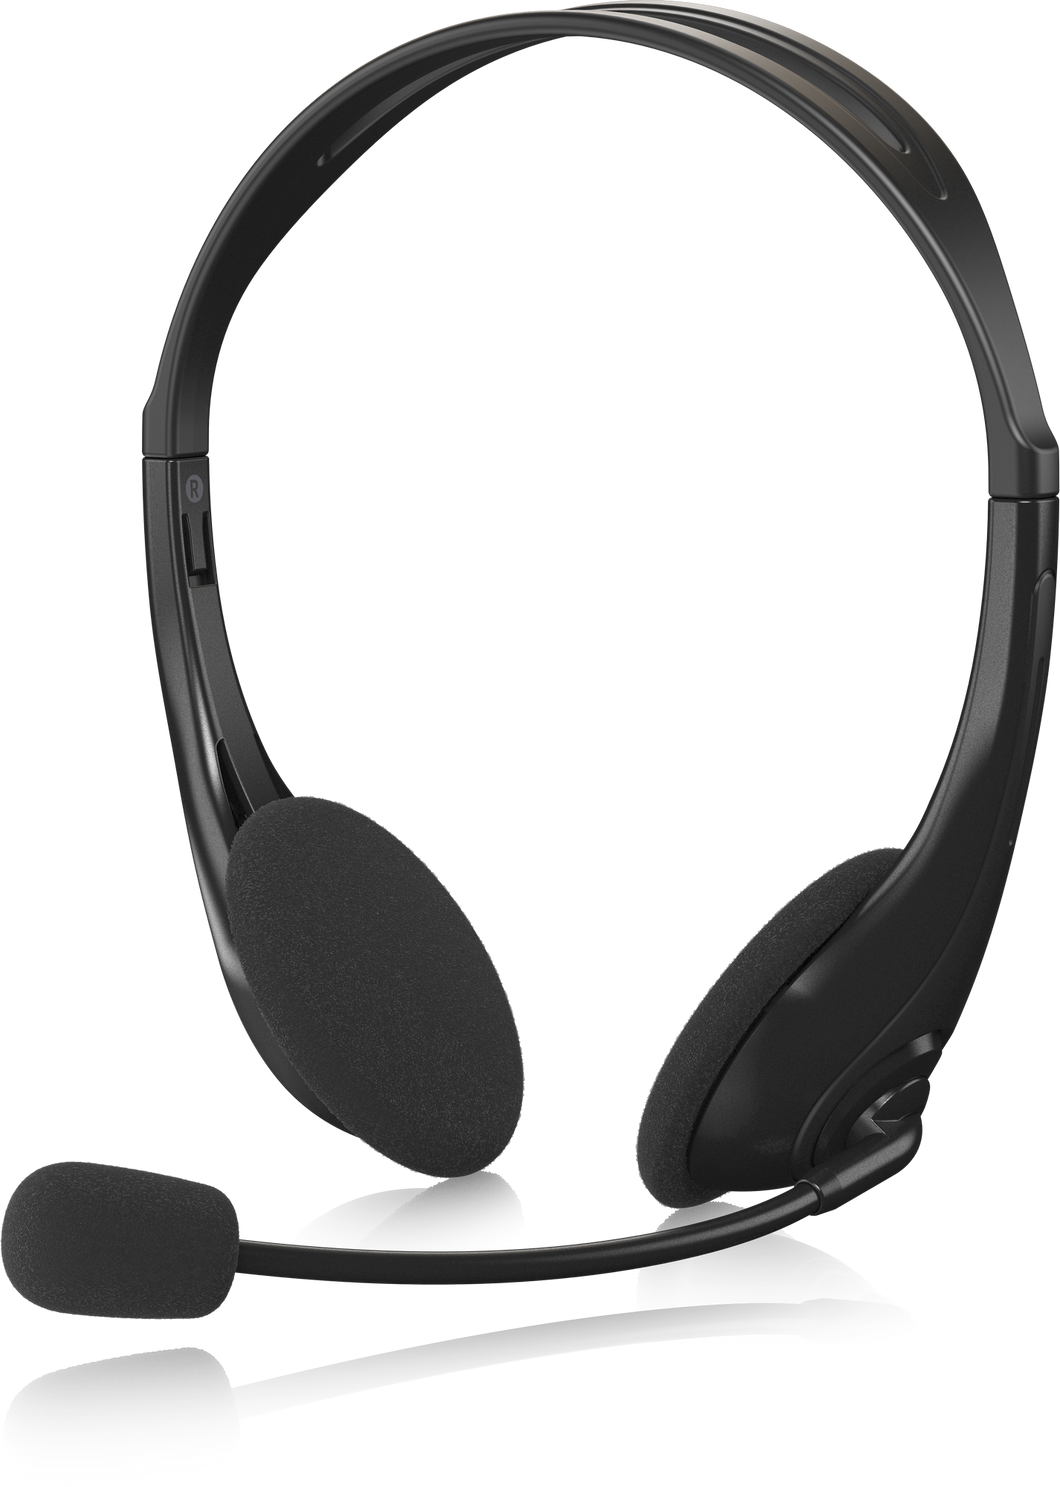 HS20 – Ultra Low-Cost Multipurpose Headset